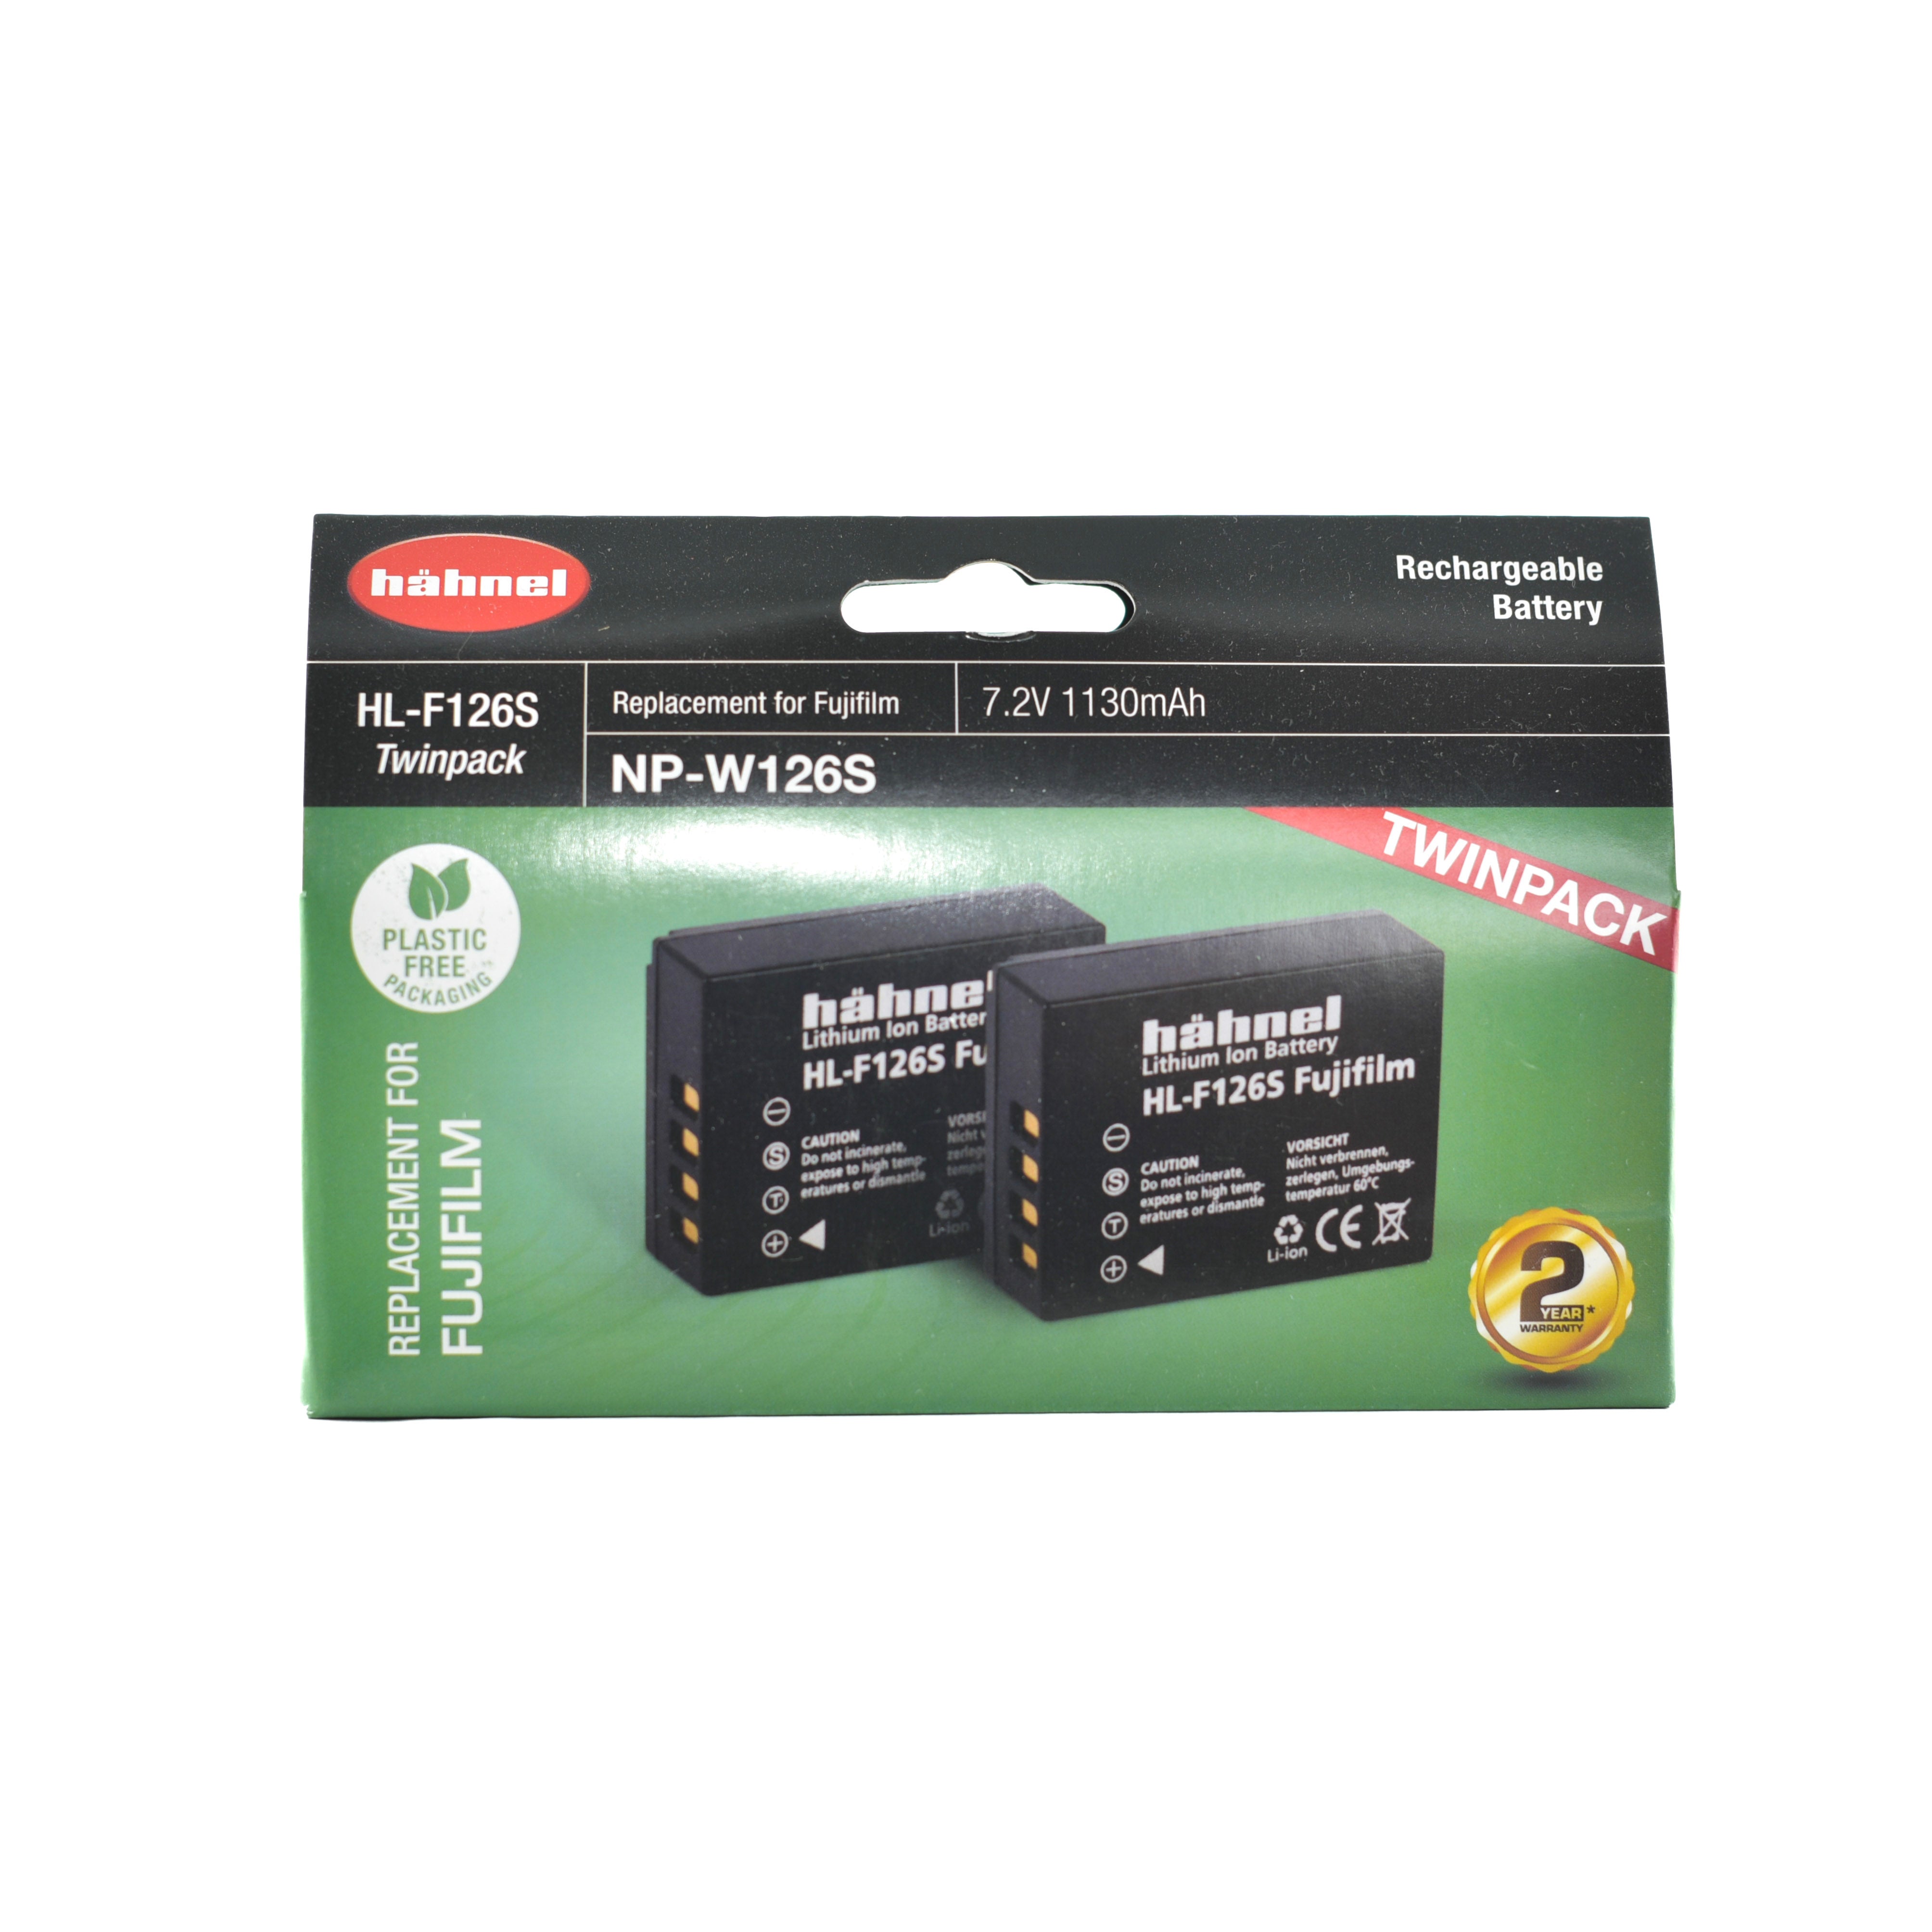 Hahnel HL-F126S (Fuji NP-W126S) Battery Twinpack